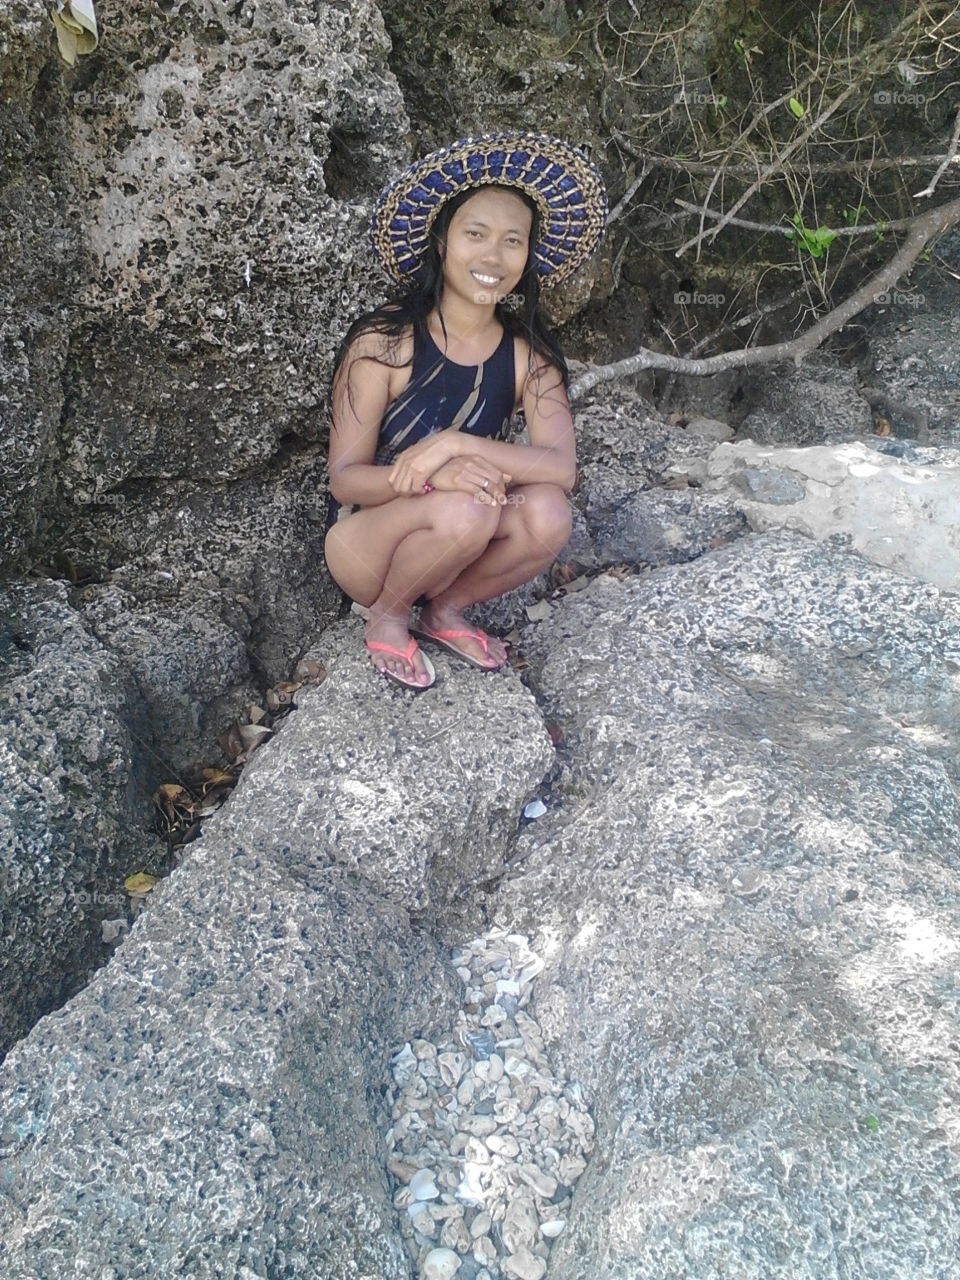 wearing a native hat on the beach